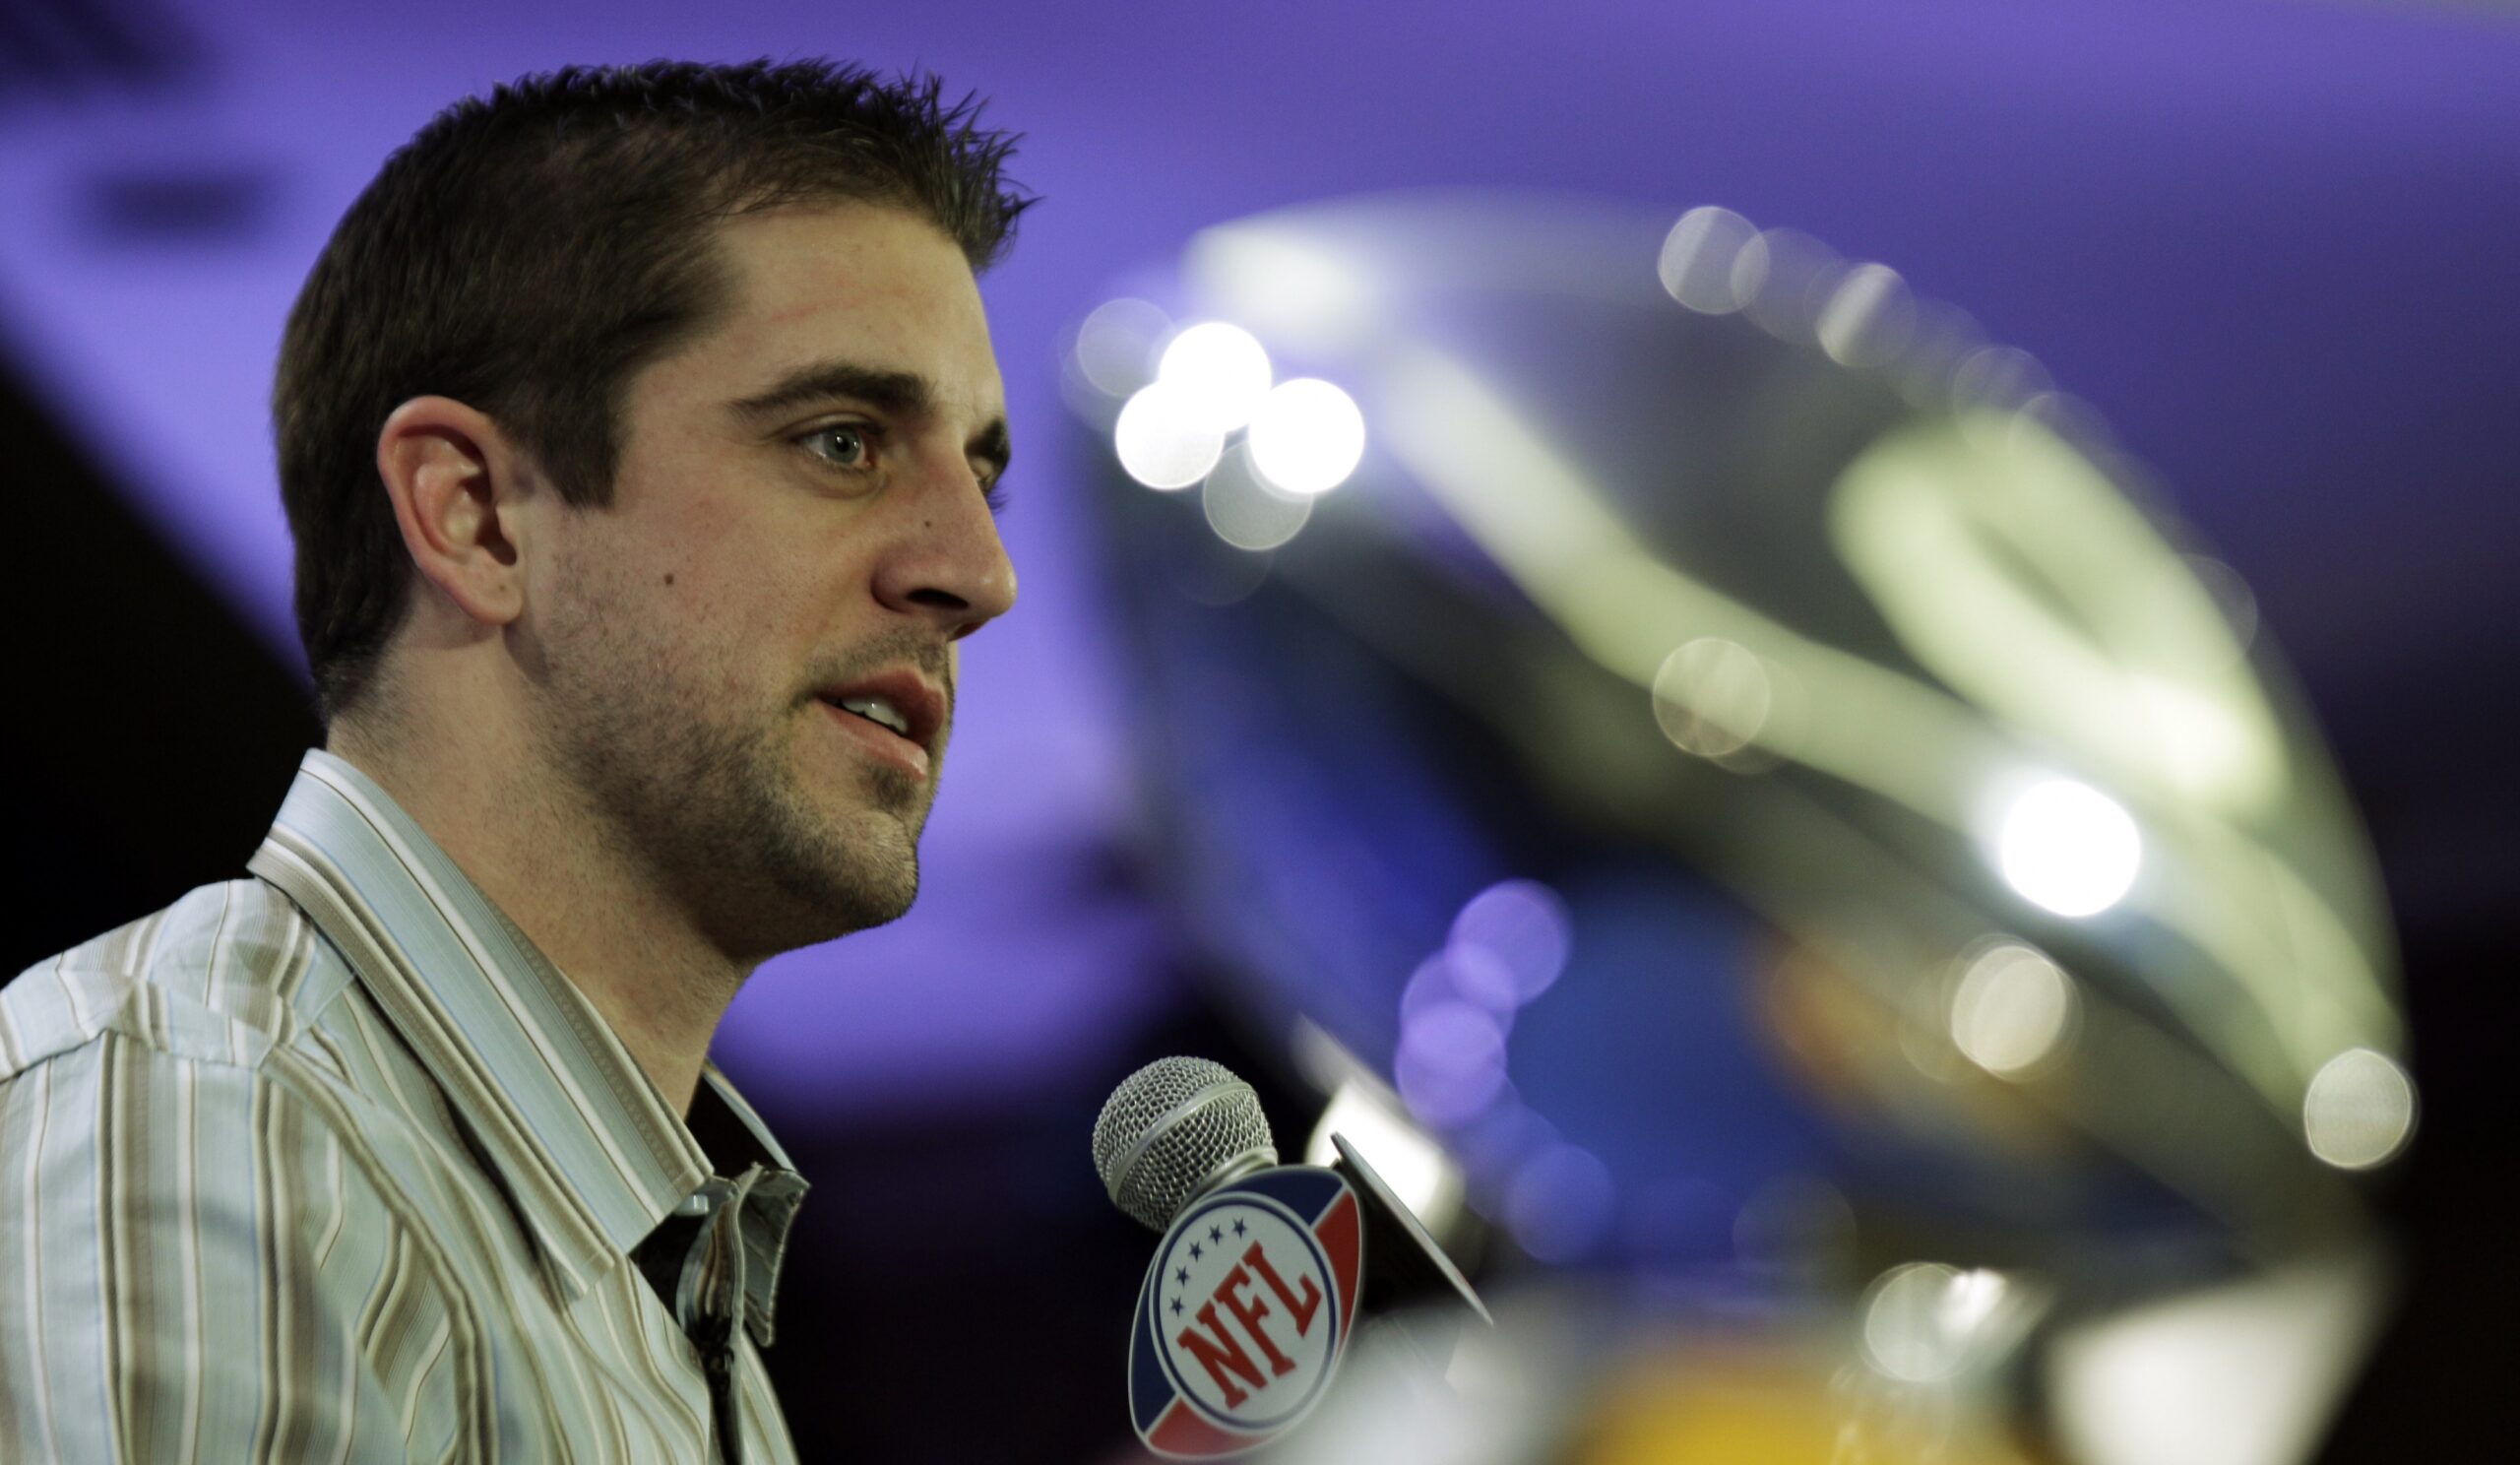 Super Bowl XLV MVP Green Bay Packers' Aaron Rodgers speaks during a news conference